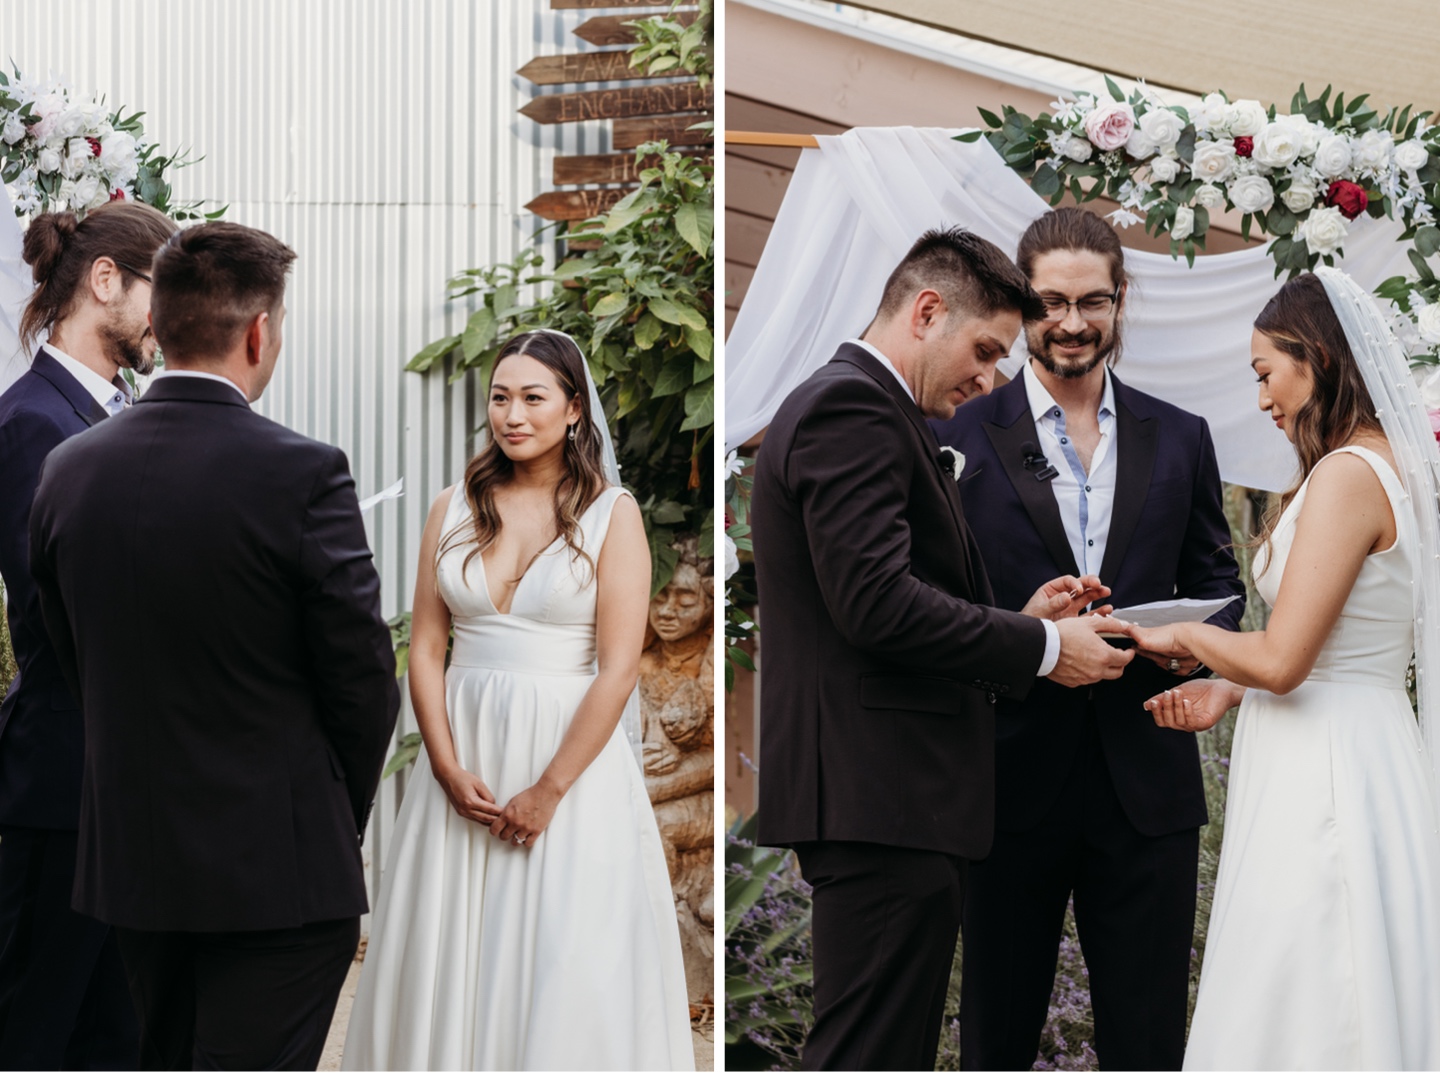 Bride and groom exchange vows and wedding rings during their Prickle Pear wedding ceremony.